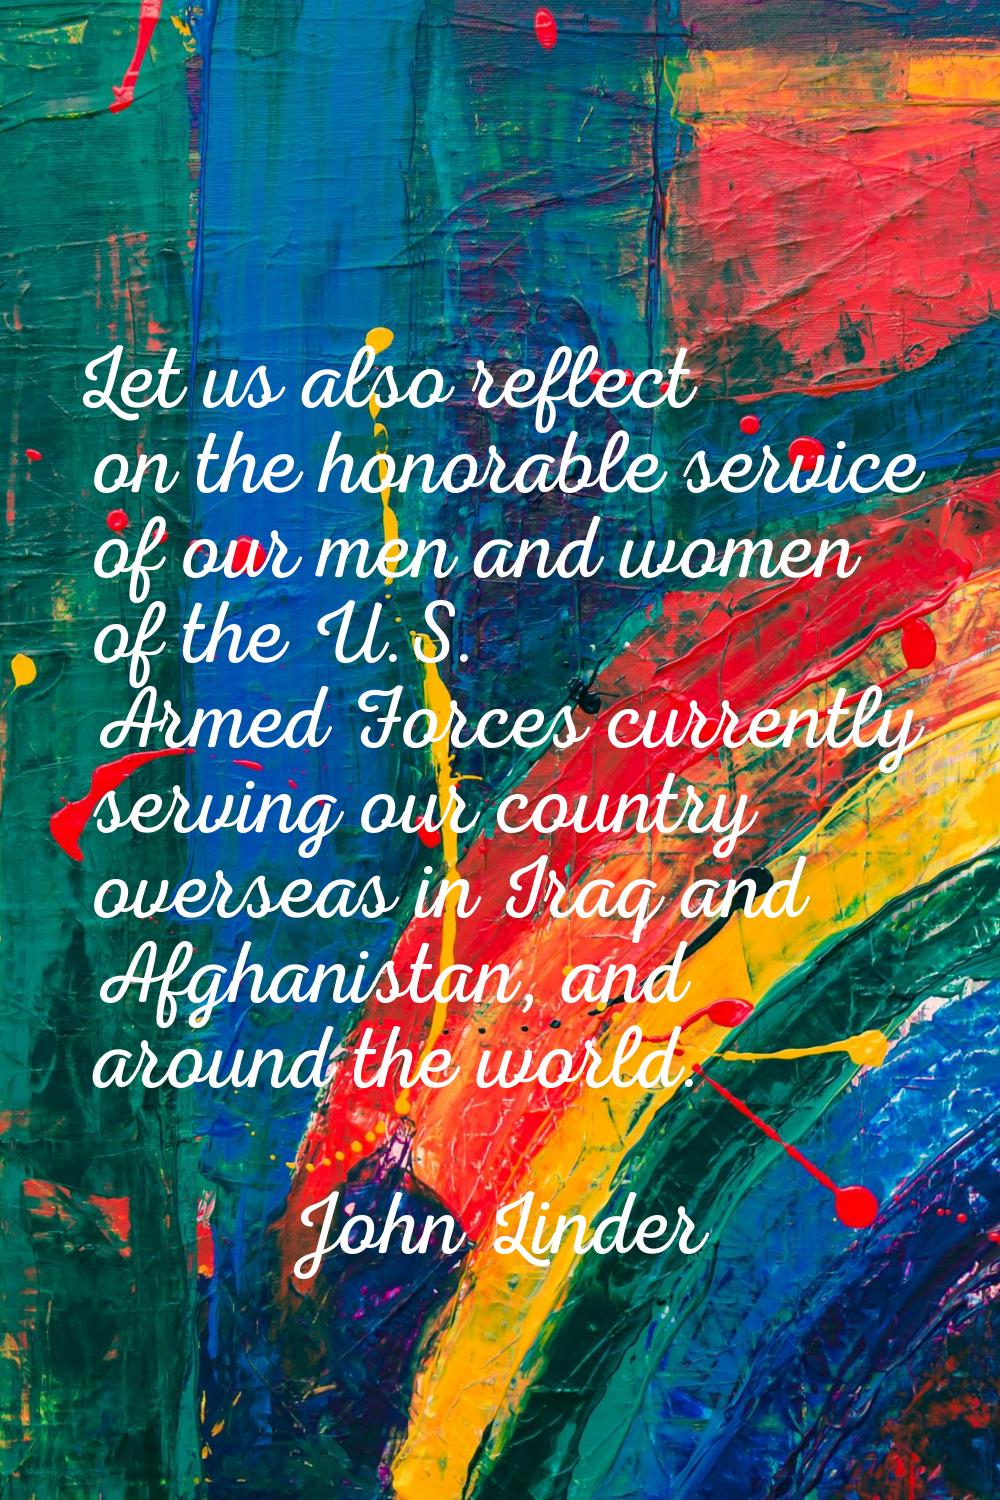 Let us also reflect on the honorable service of our men and women of the U.S. Armed Forces currentl